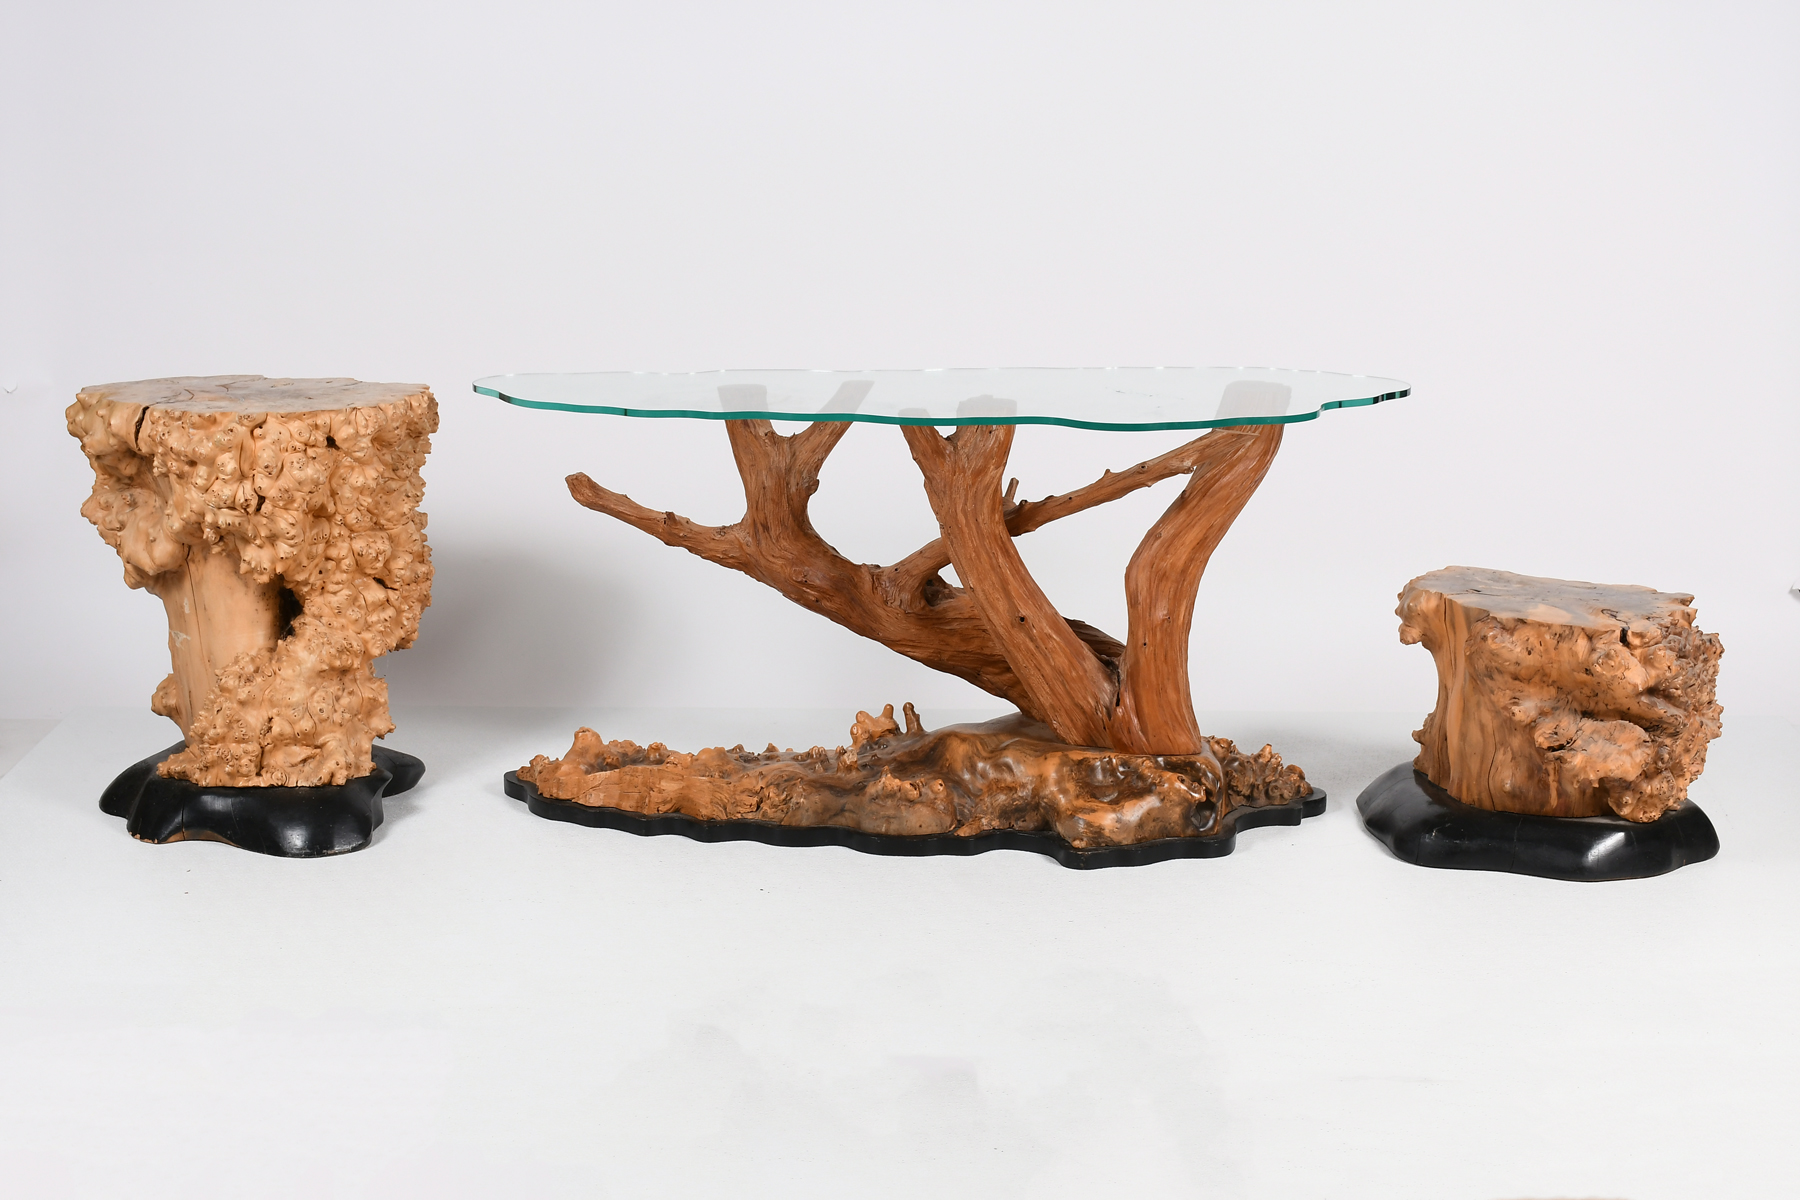 3 CYPRESS ROOT TABLES Includes 2ed41d